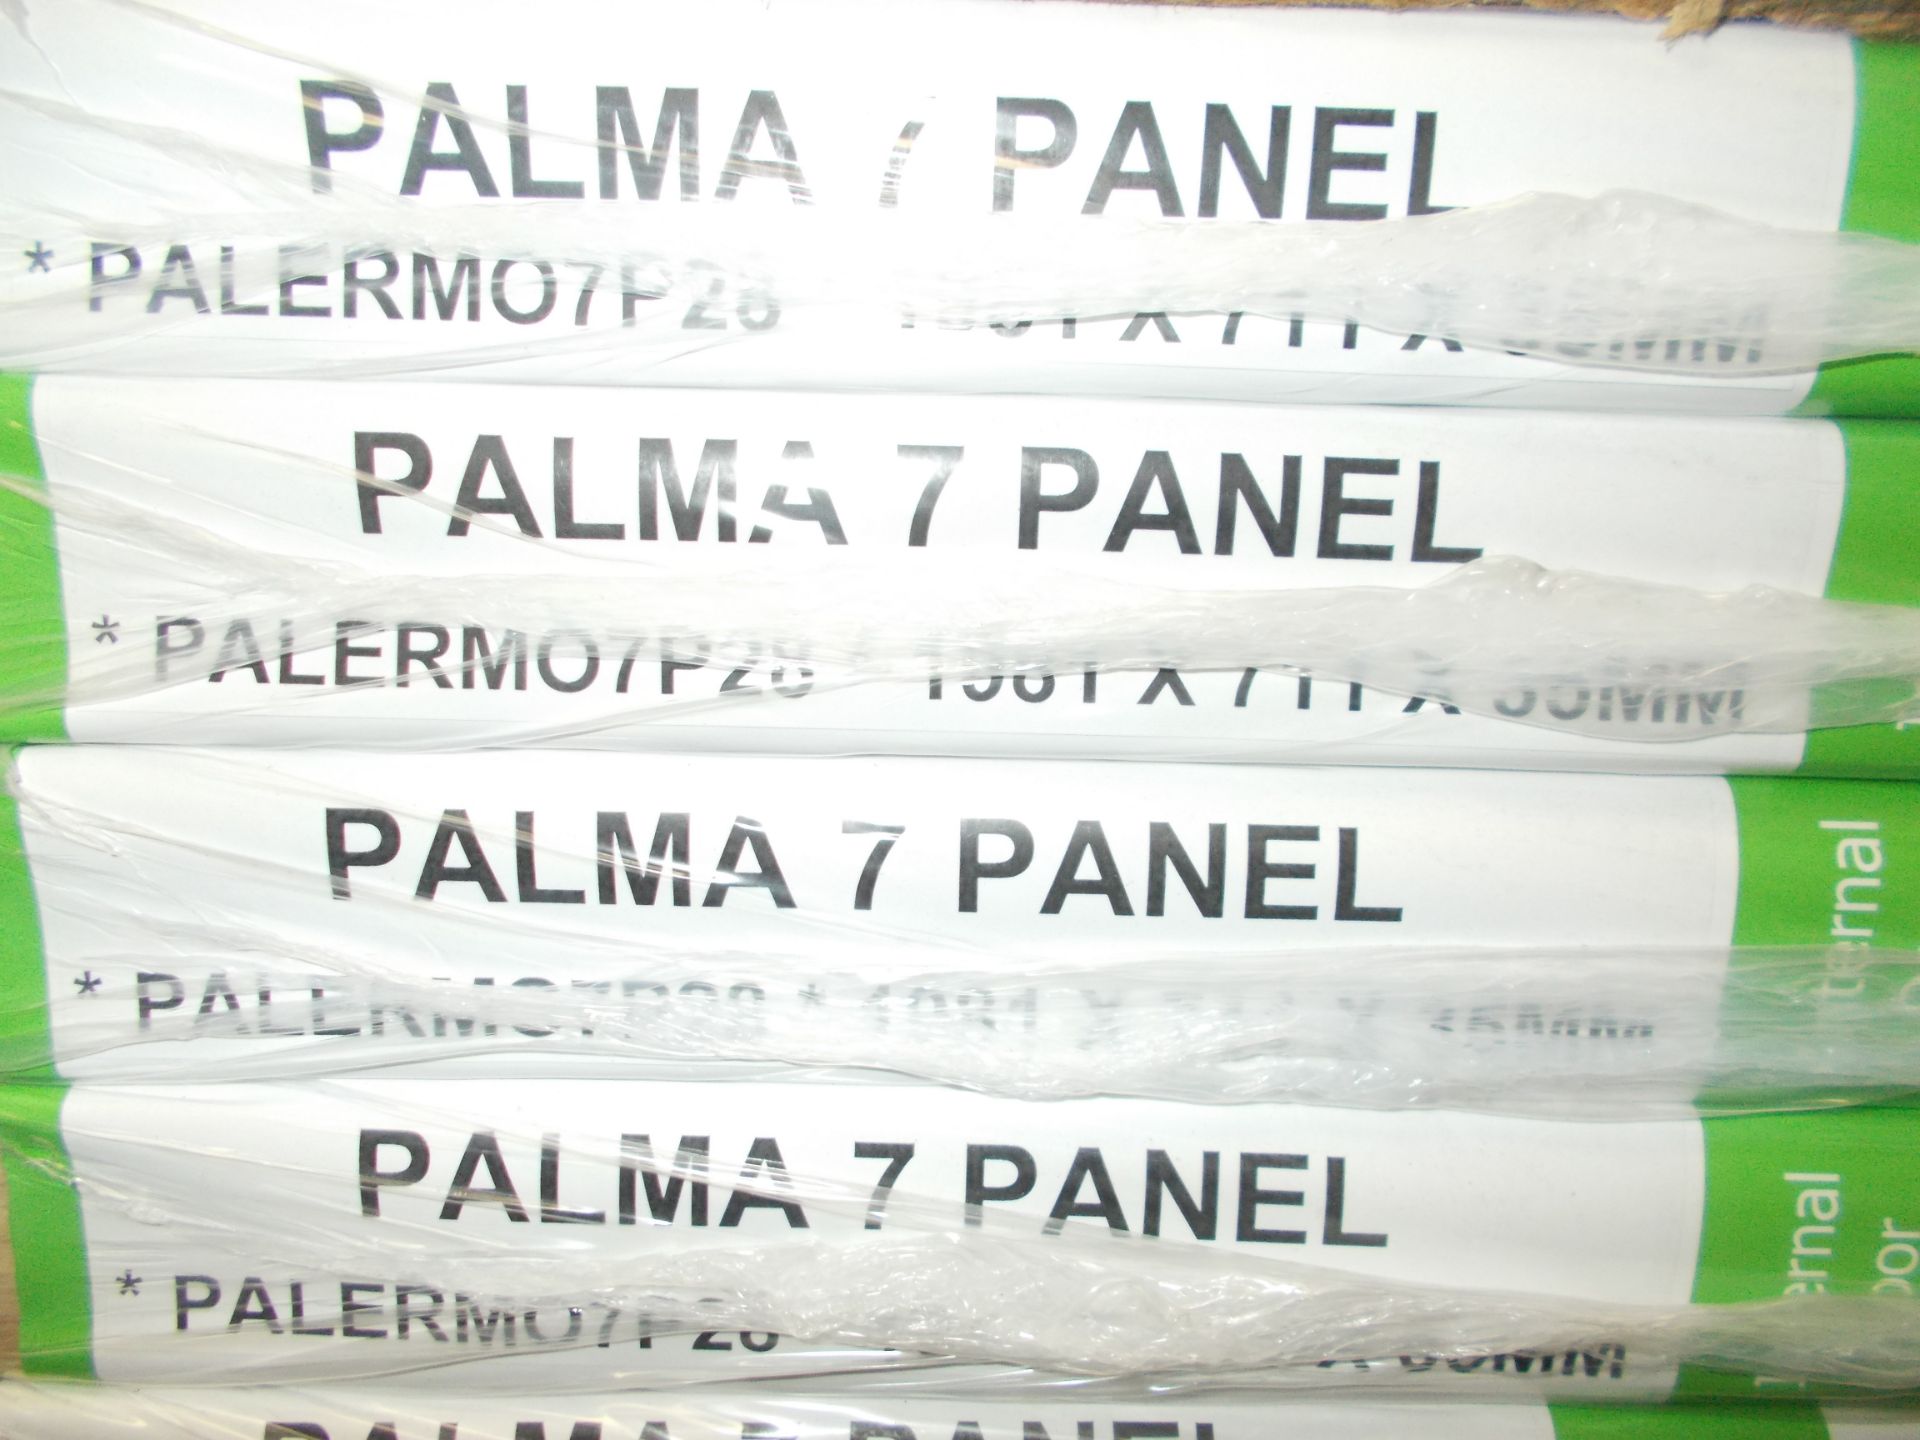 4 x Palma 7 Panel Internal PALERMO7P28, 1981x711x35mm - Lots to be handed out in order they are - Image 3 of 3